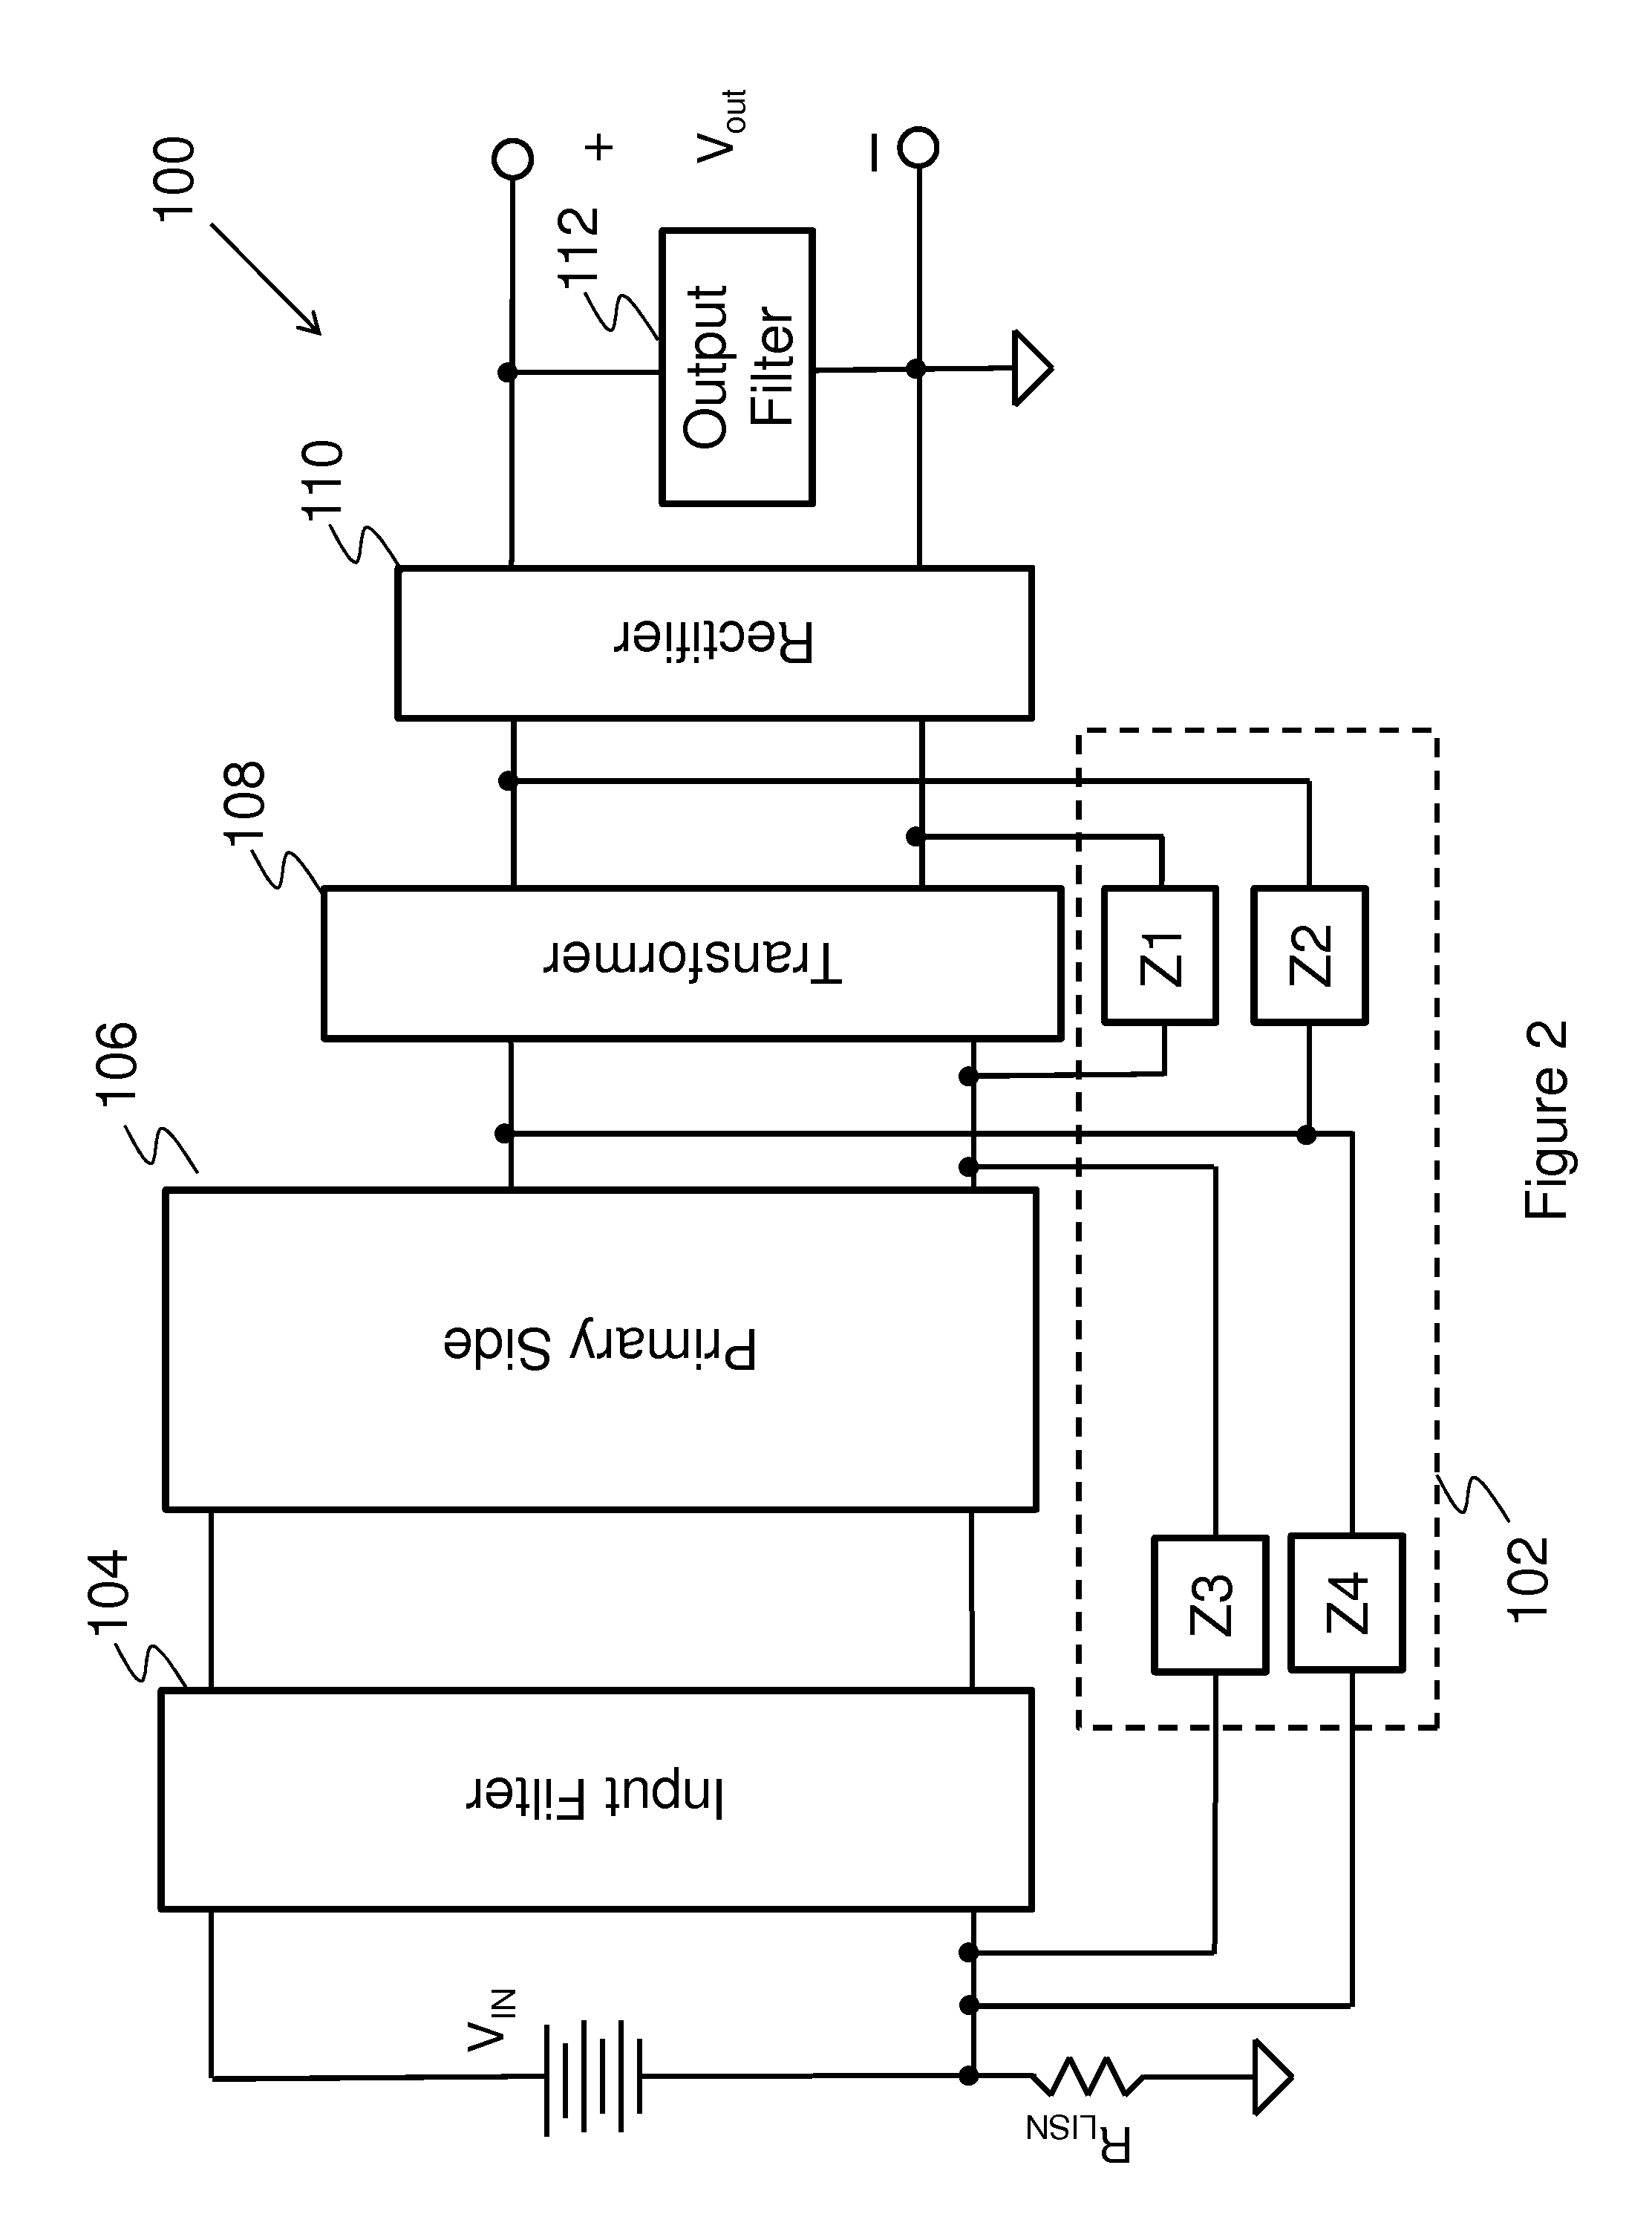 Common Mode Noise Reduction Apparatus and Method